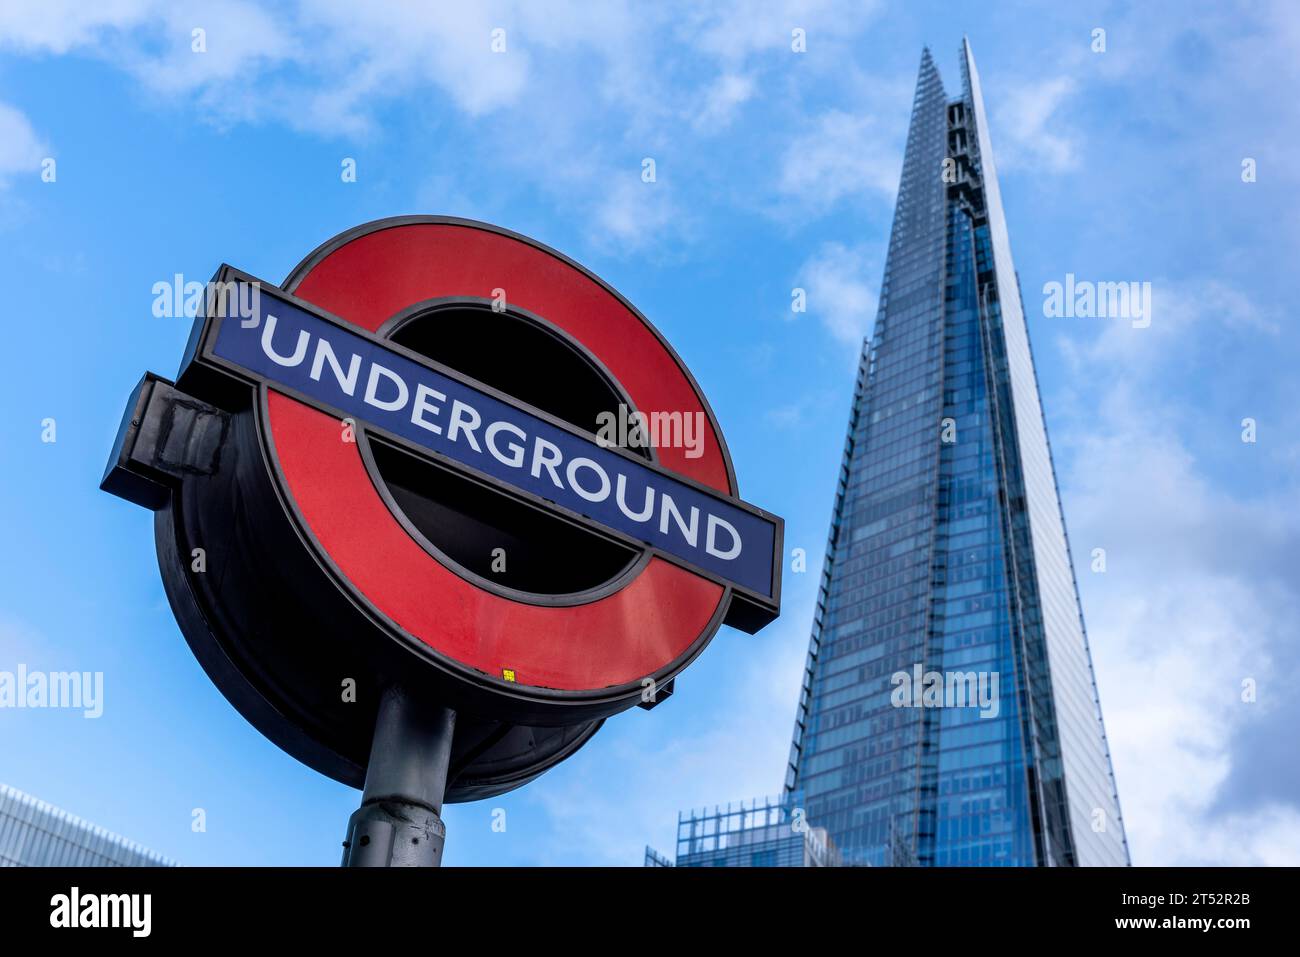 The Shard Building and London Underground Roundel Sign, Londres, Royaume-Uni Banque D'Images